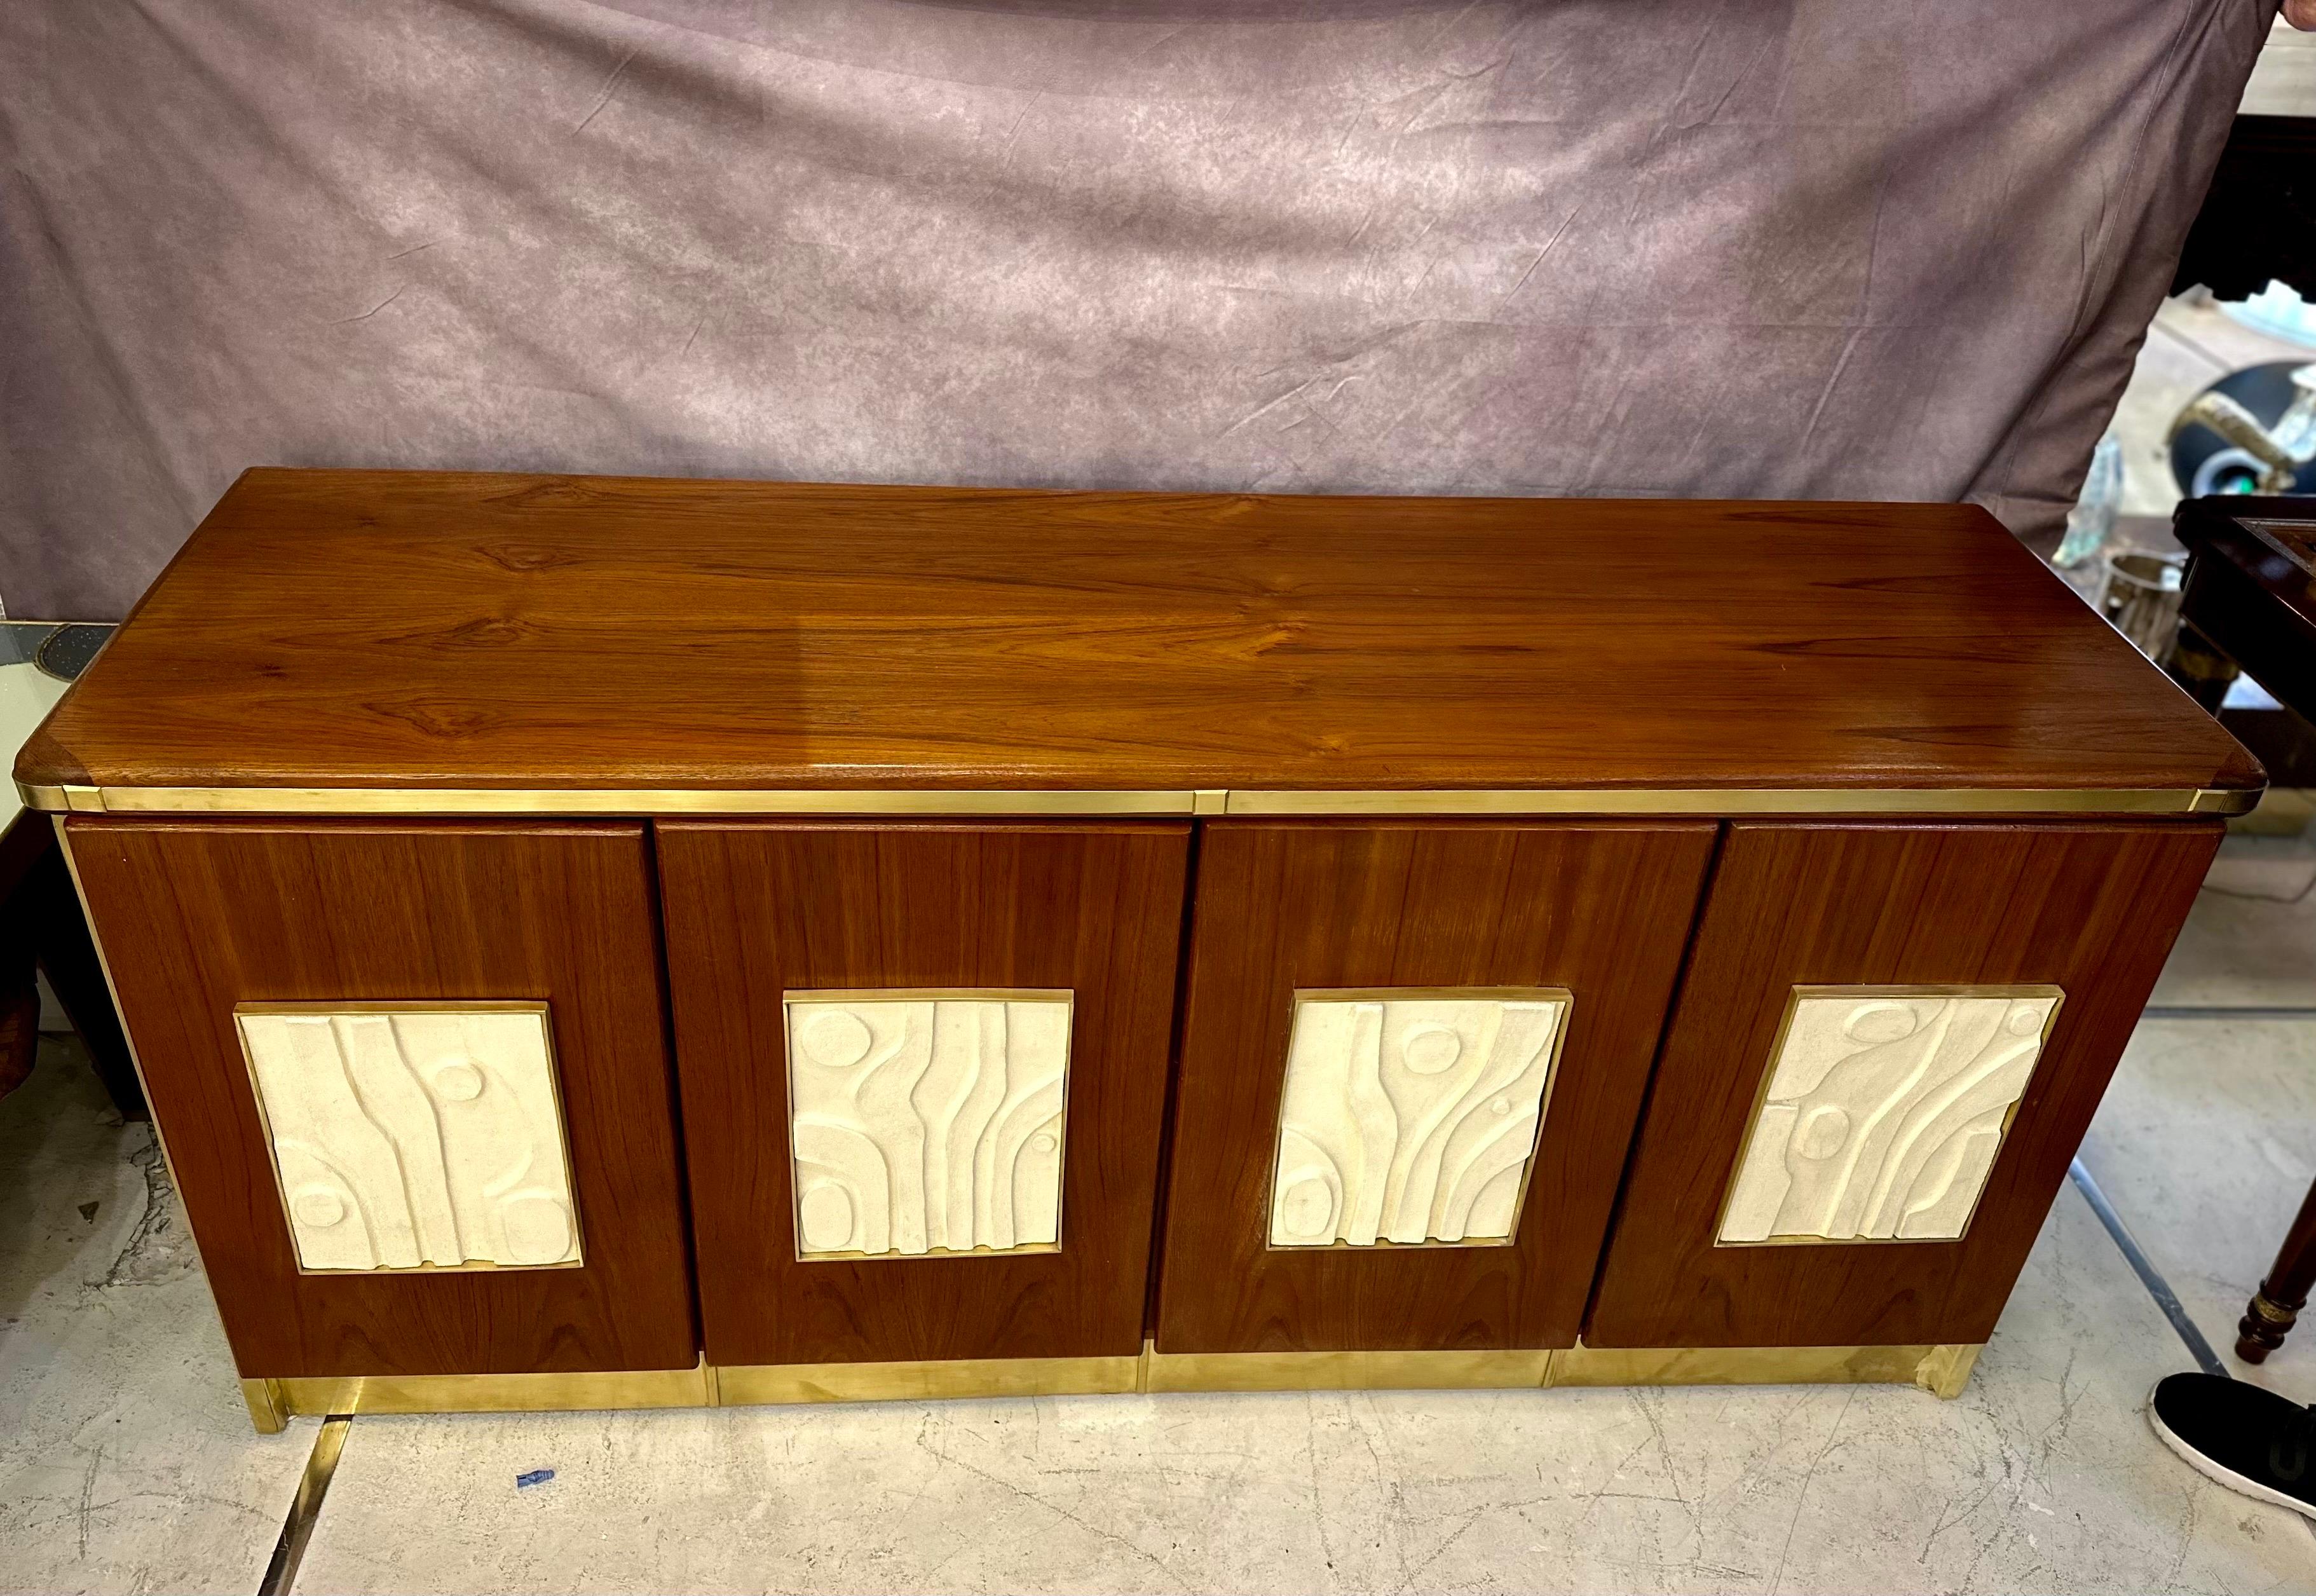 Brass Custom Made Artisanal Wood Credenza with handmade Ceramic Inclusions by Kat’s For Sale